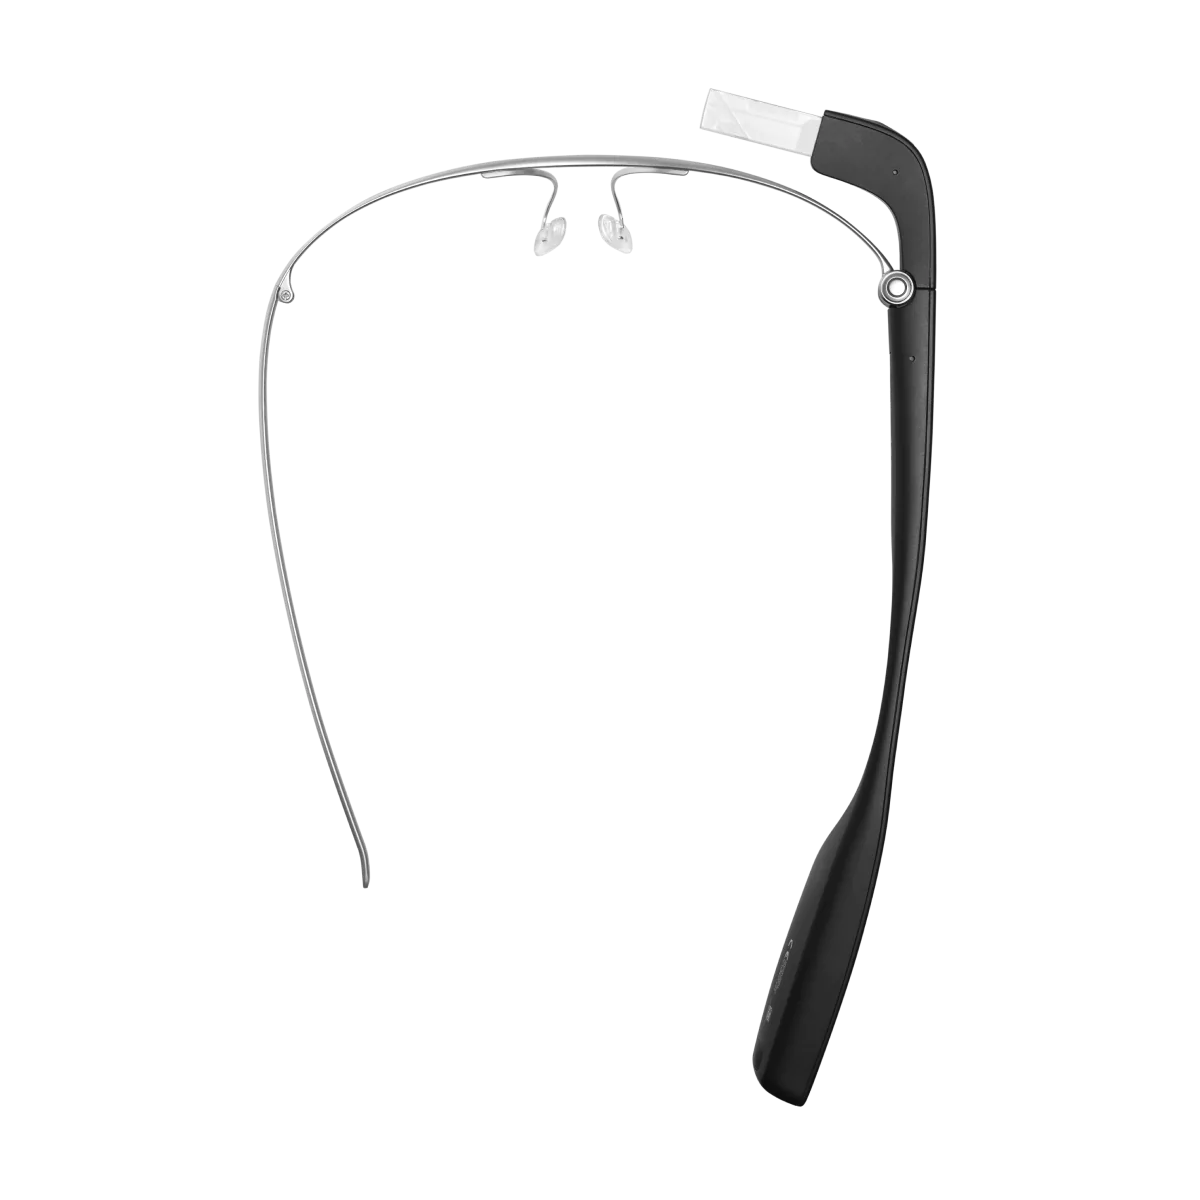 Photo of the Envision Glasses with the Titanium Frames (Top view)